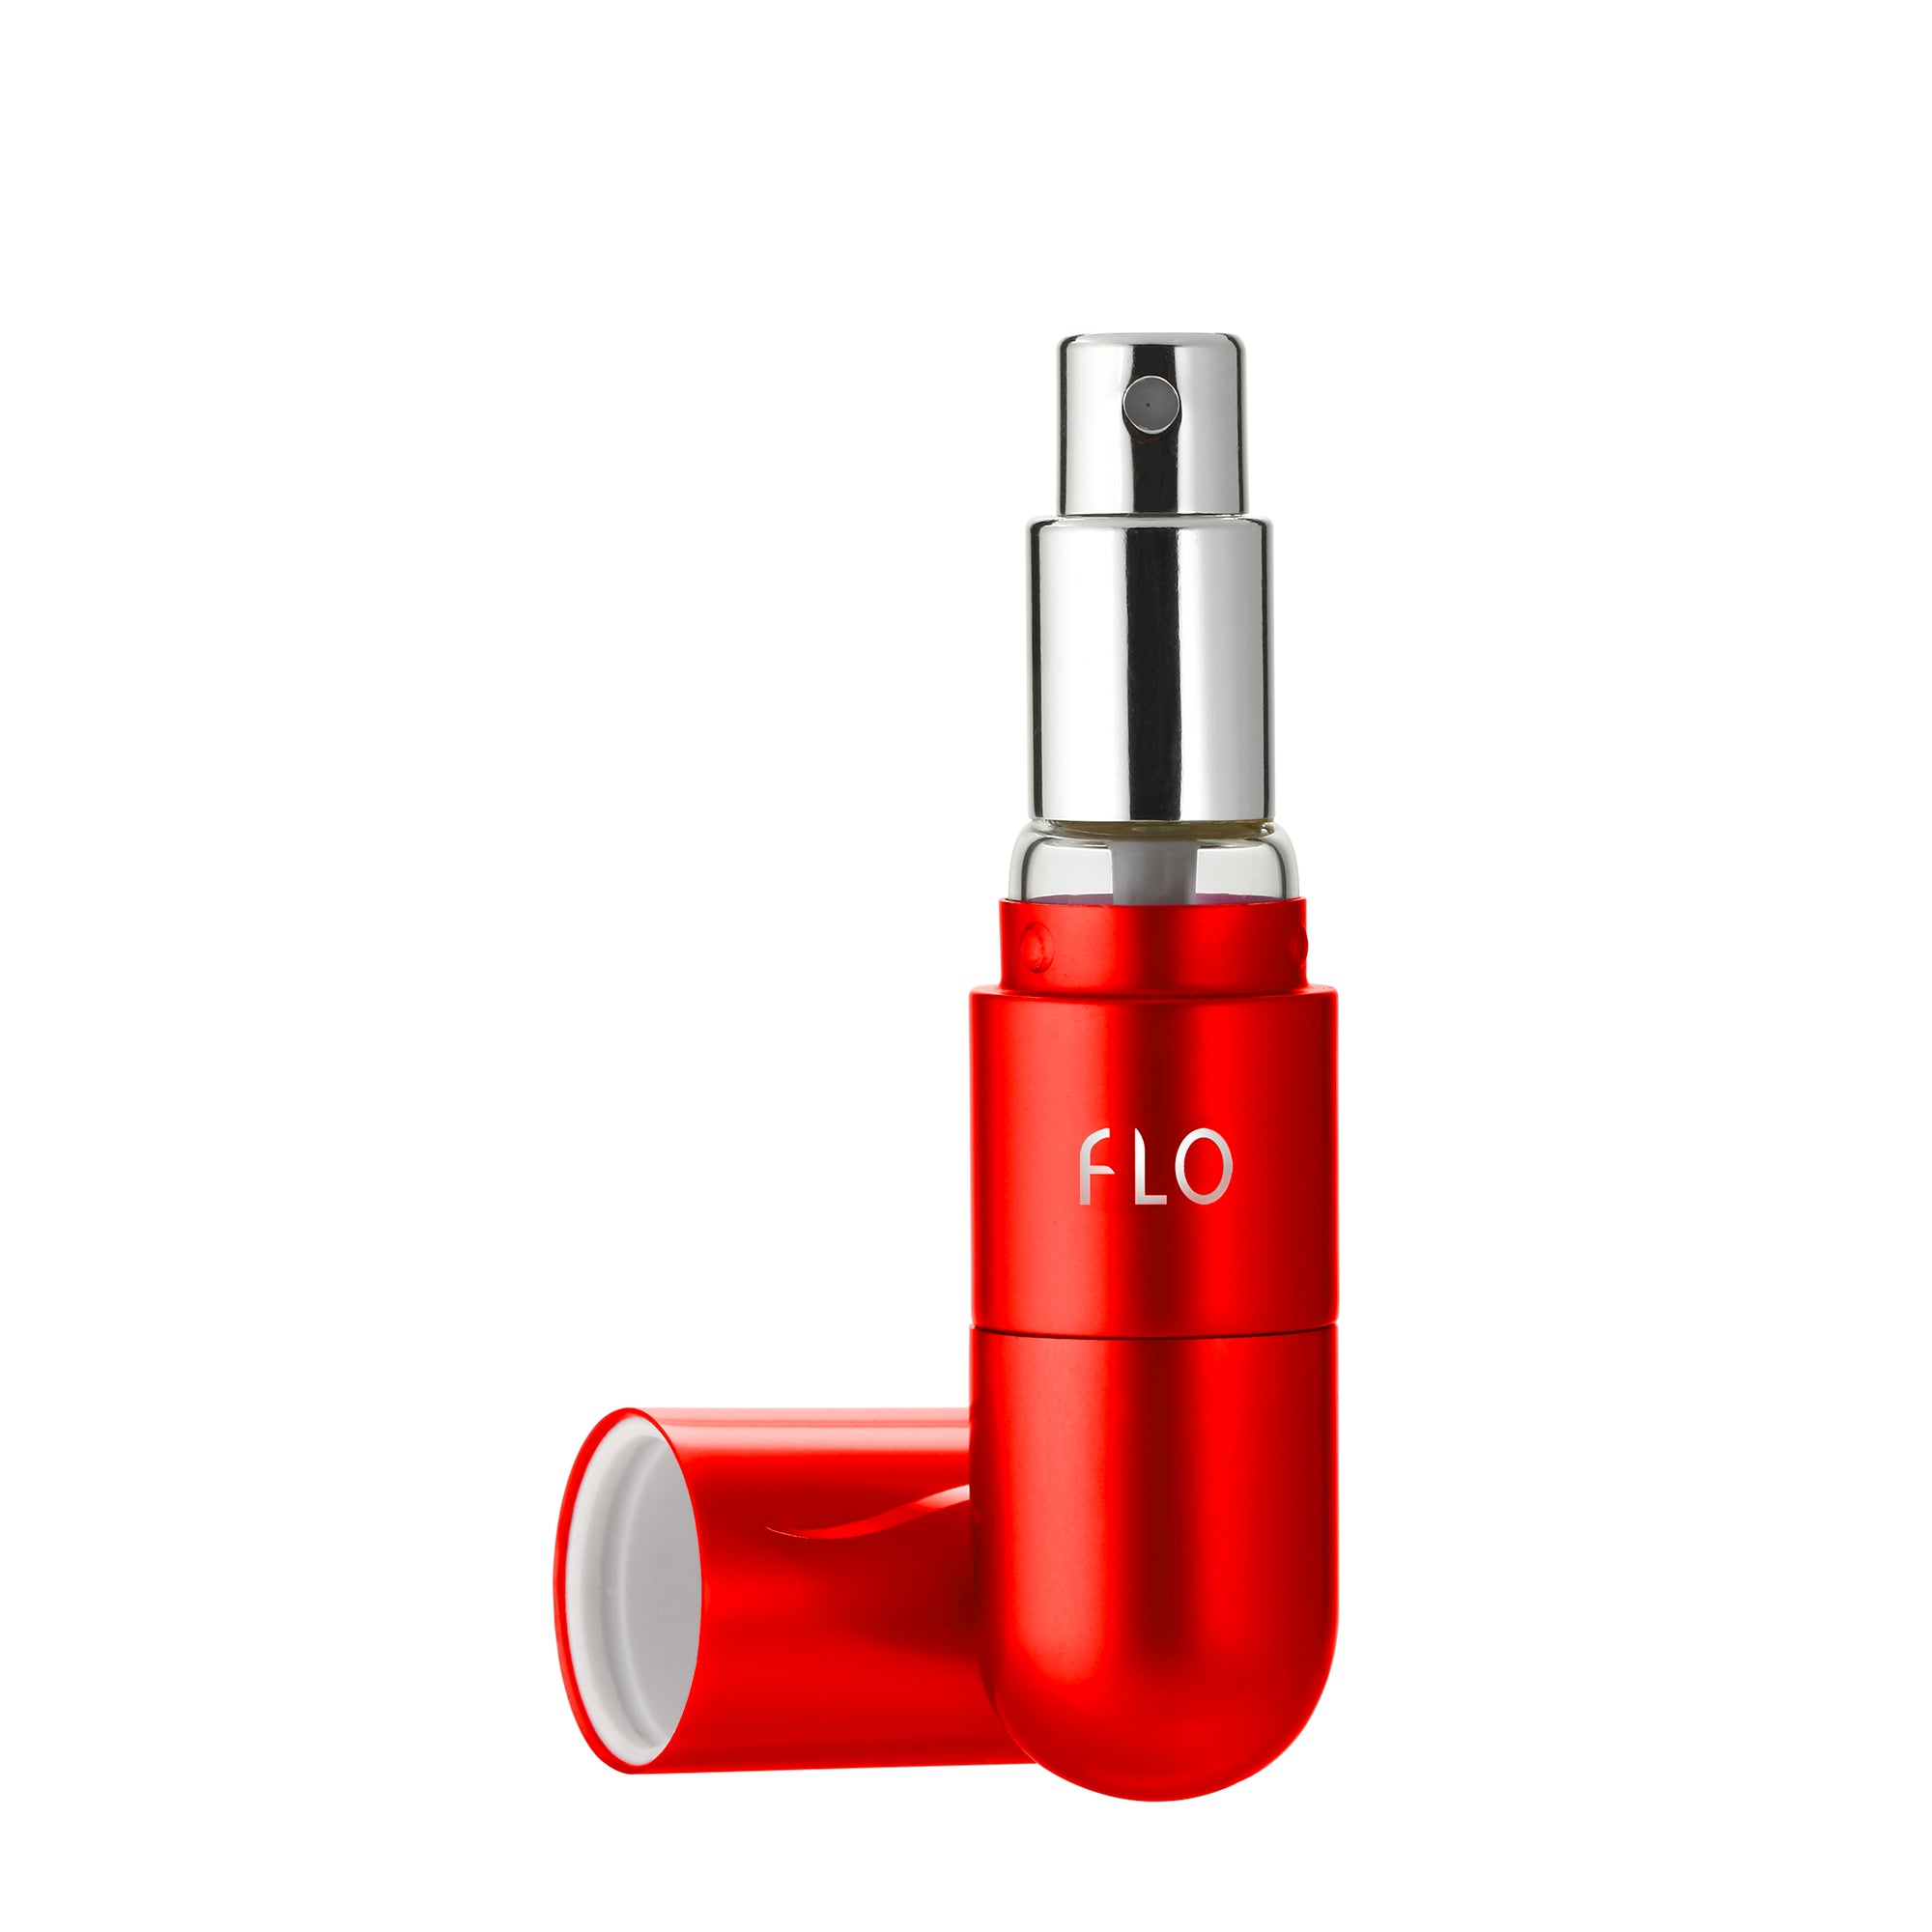 Pump and Flo Perfumania by Atomizer Fill – Fragrance